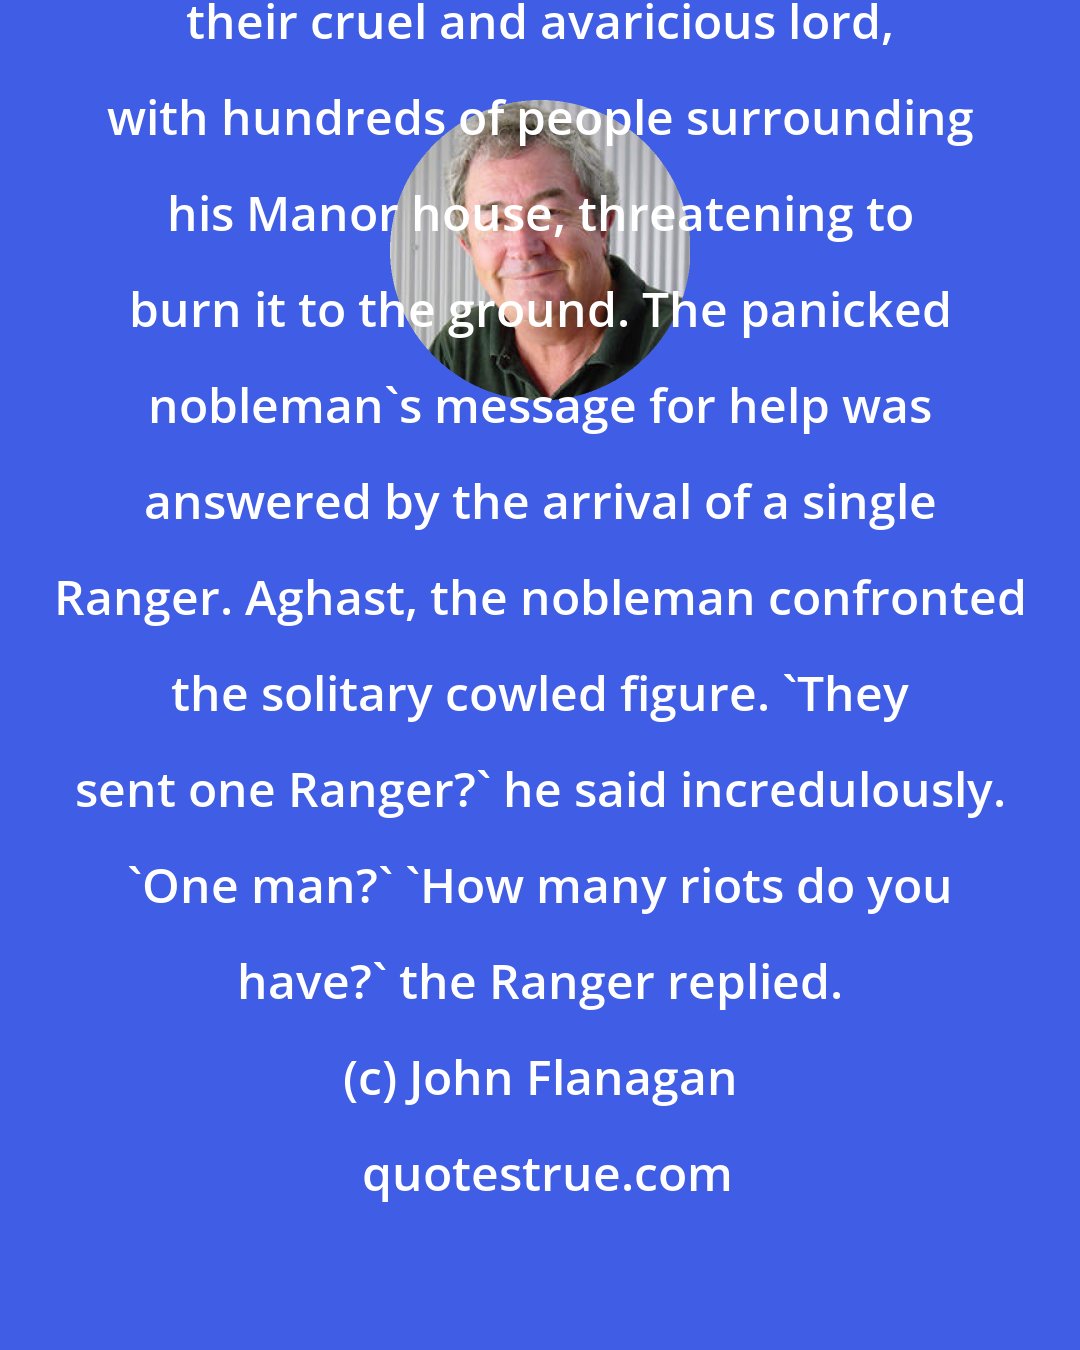 John Flanagan: A minor fief had risen up against their cruel and avaricious lord, with hundreds of people surrounding his Manor house, threatening to burn it to the ground. The panicked nobleman's message for help was answered by the arrival of a single Ranger. Aghast, the nobleman confronted the solitary cowled figure. 'They sent one Ranger?' he said incredulously. 'One man?' 'How many riots do you have?' the Ranger replied.